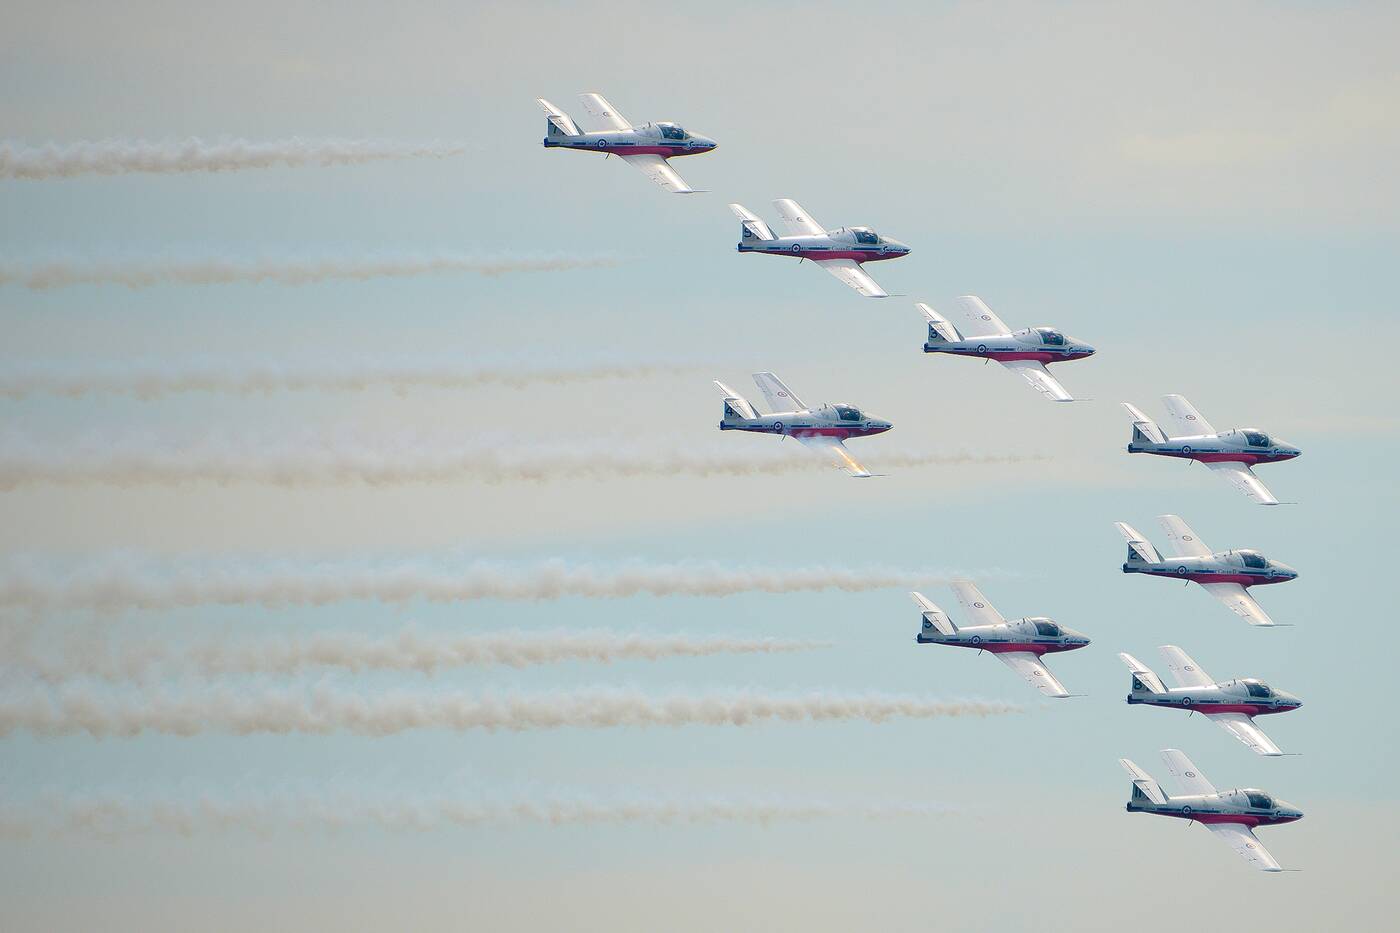 The Toronto Air Show thrills high above the CNE